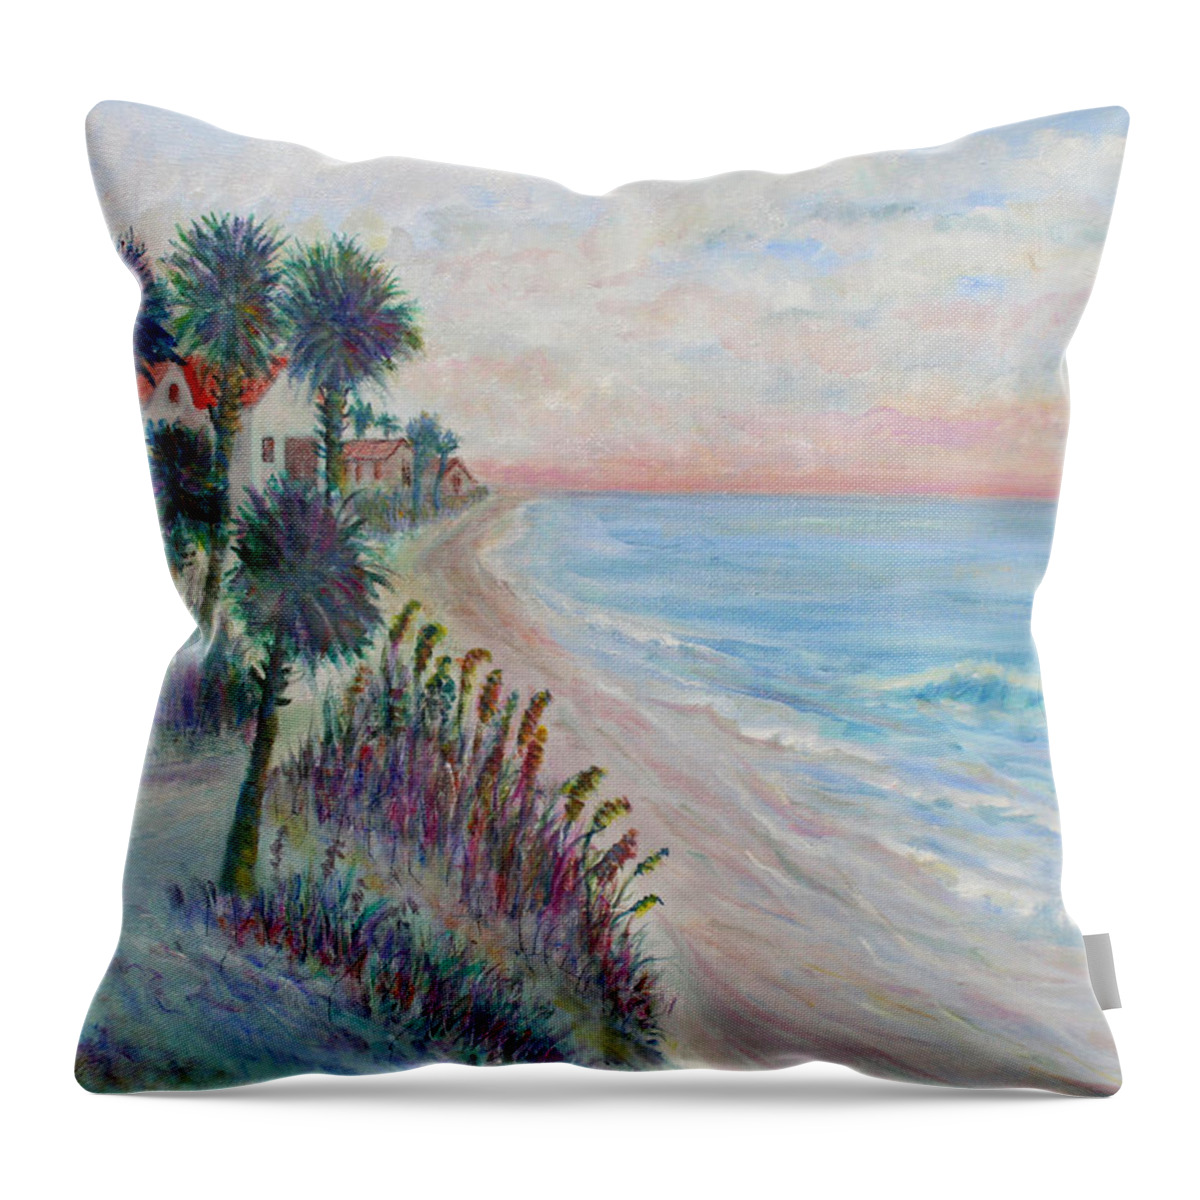 Seascape Throw Pillow featuring the painting Isle of Palms by Ben Kiger